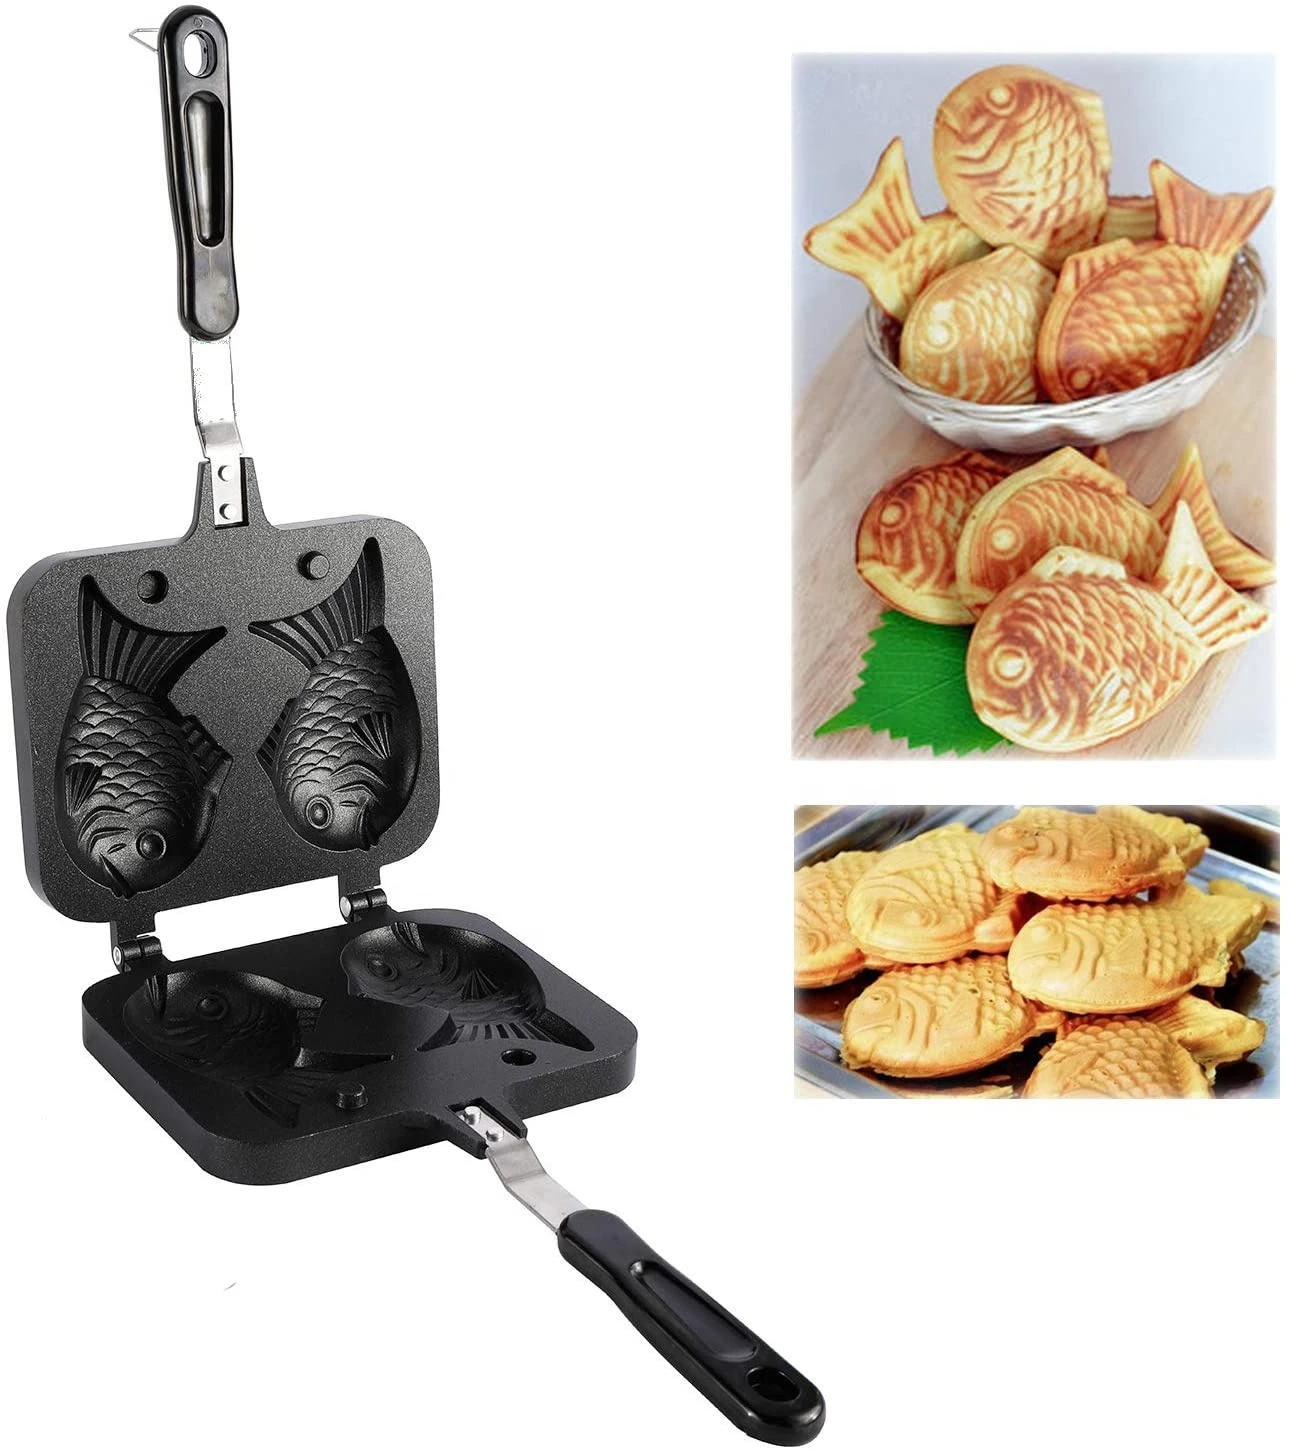 Taiyaki Pan Fish Shape Double Pan Non-stick Waffle Cake Baking Mold Plate for Home DIY Cooking Party